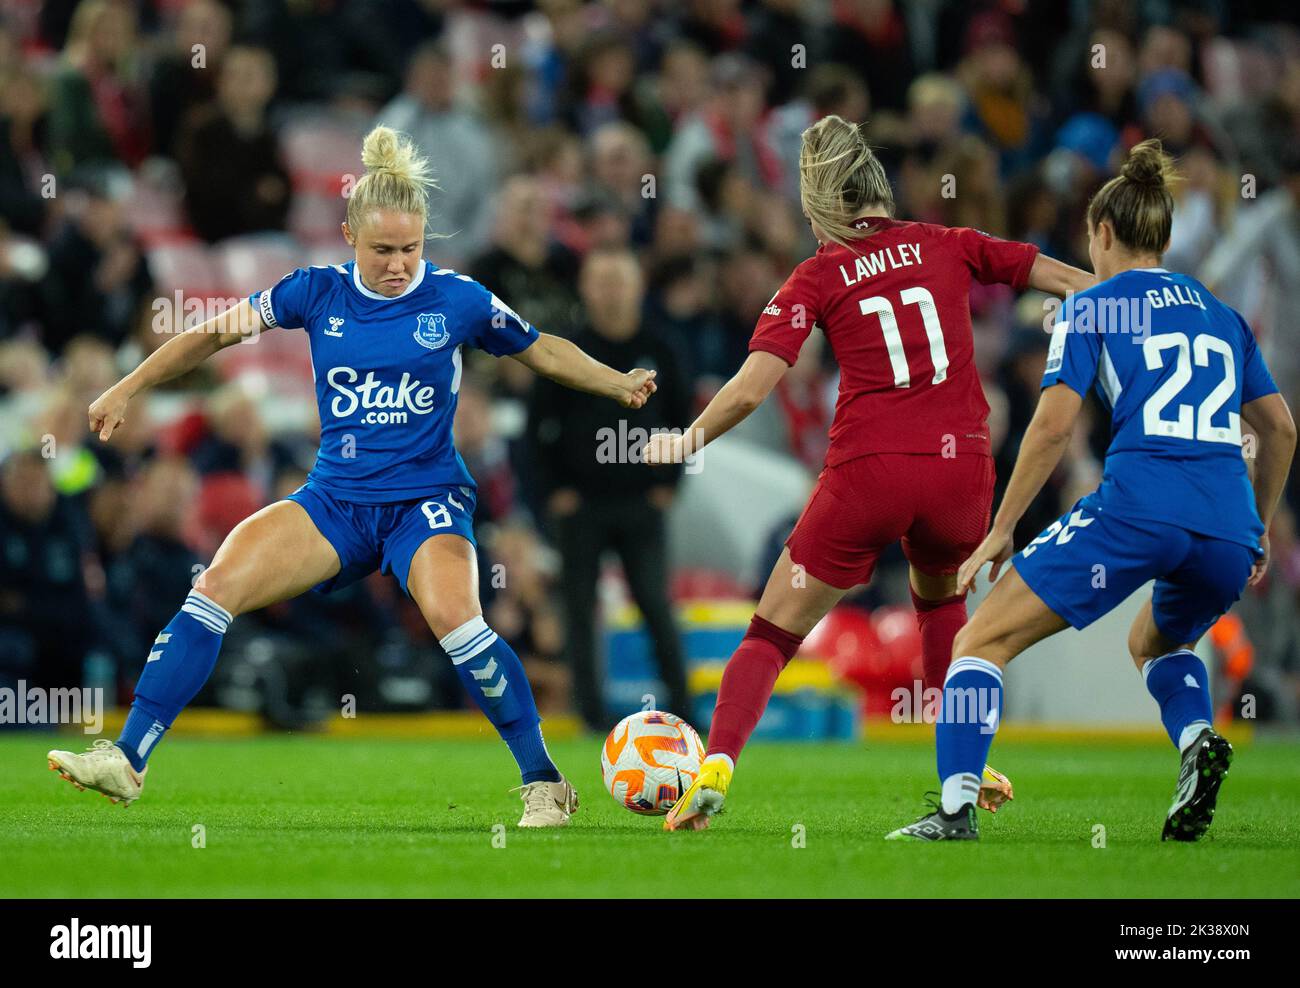 Liverpool, UK. 25th Sep, 2022. Izzy Christiansen (#8 Everton) attempts to tackle Melissa Lawley (#11 Liverpool) during the Barclays Womens Super League fixture between Liverpool and Everton at Anfield in Liverpool, England. (James Whitehead/SPP) Credit: SPP Sport Press Photo. /Alamy Live News Stock Photo